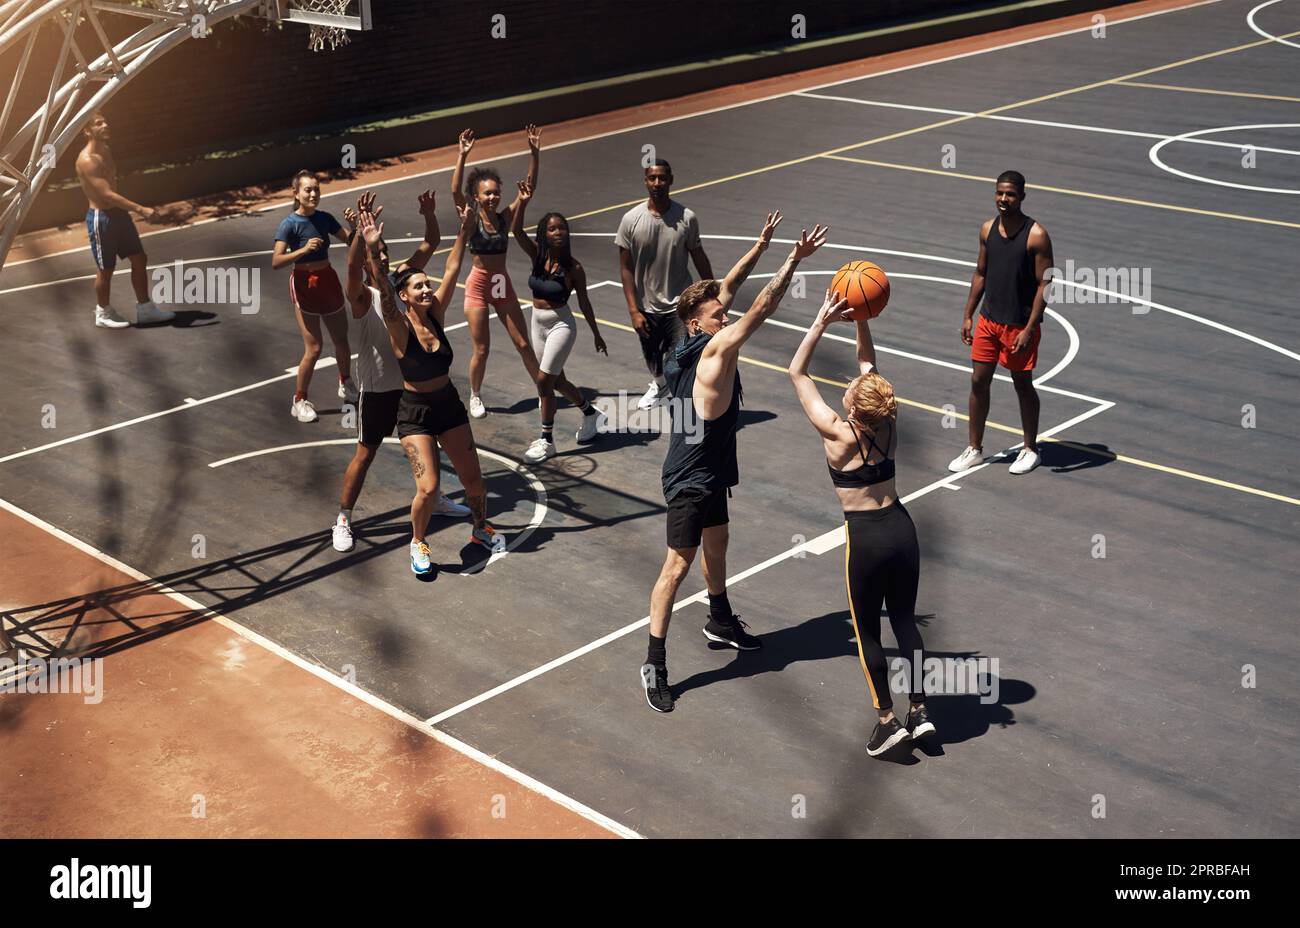 Everyone is totally immersed in the game. a group of sporty young people playing basketball on a sports court. Stock Photo